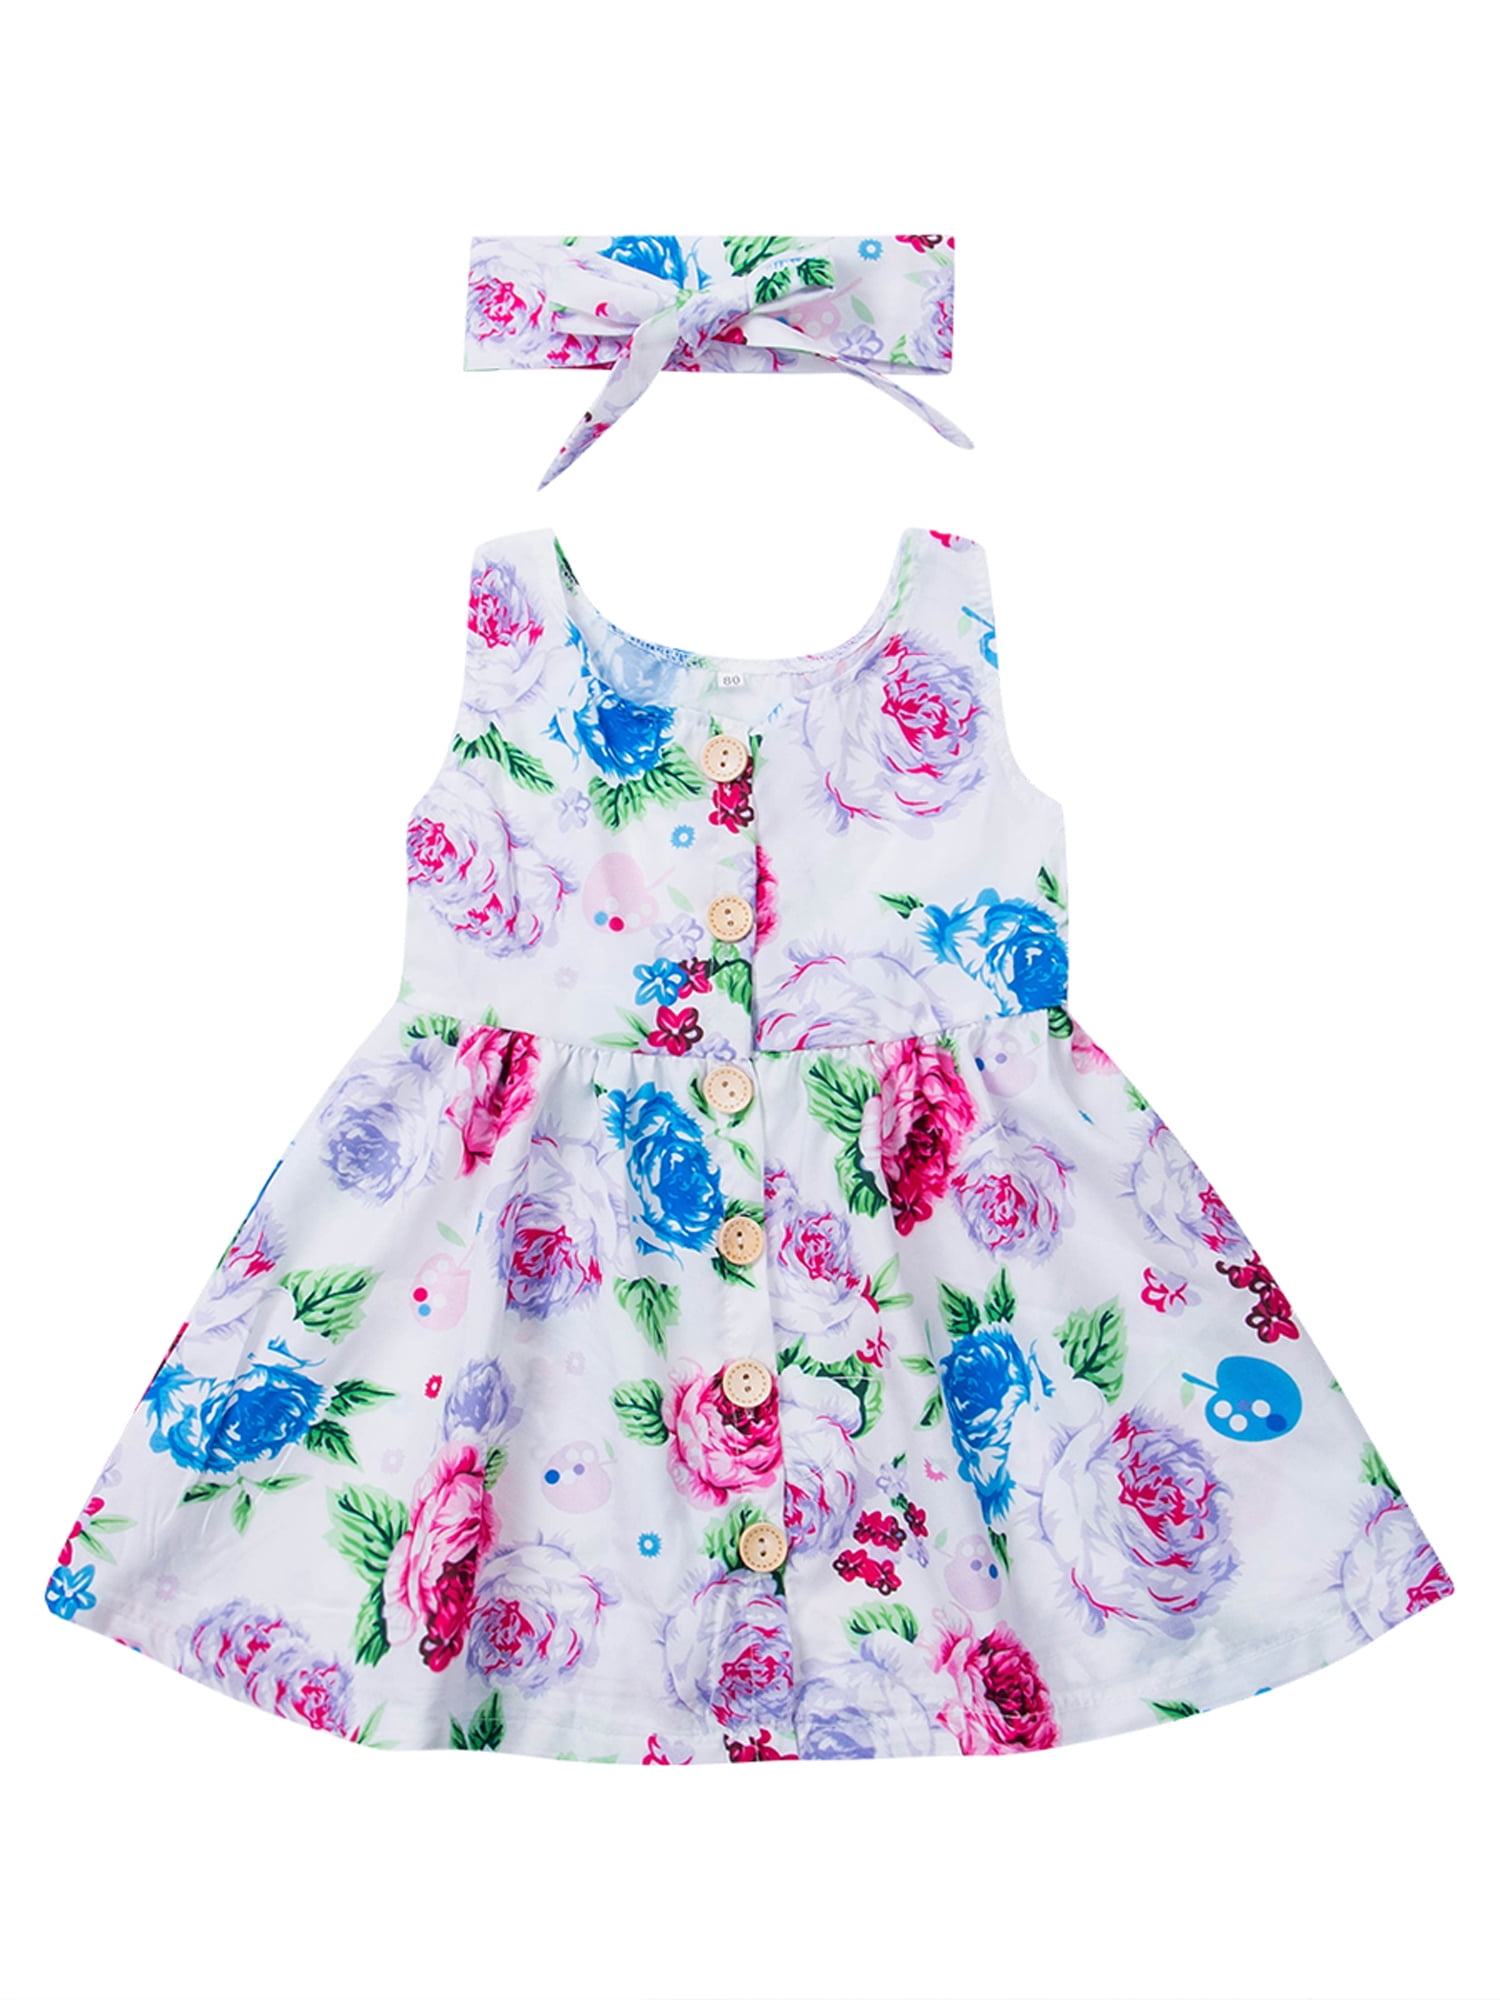 Edjude Toddler Girls Floral Dress Short Sleeve Casual Dresses Party Princess Baby Summer Outfit 